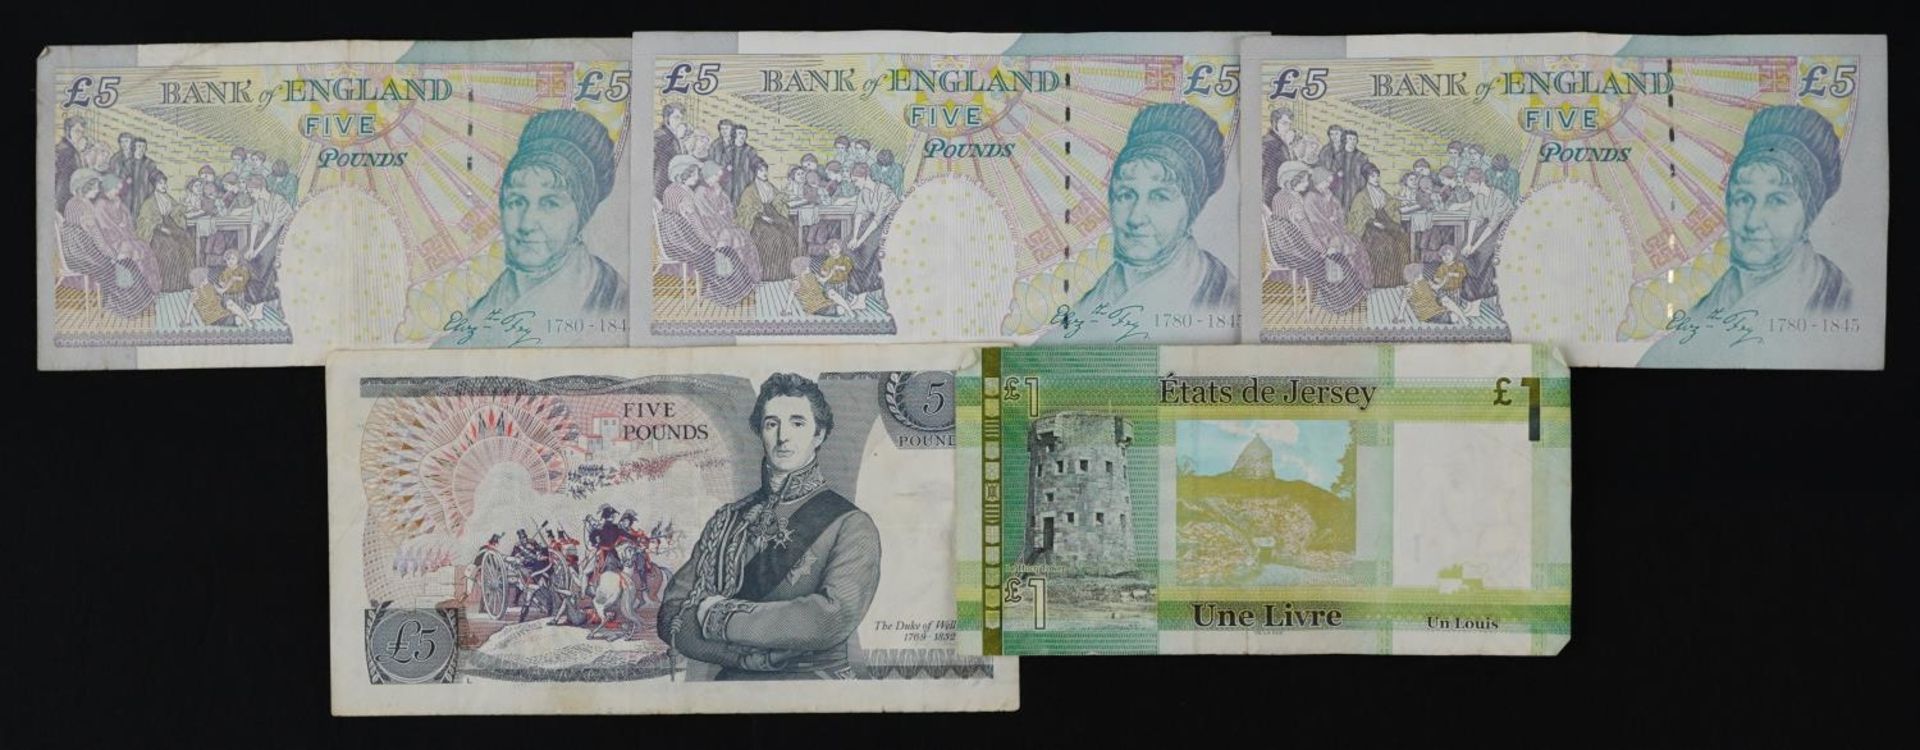 British and Irish banknotes including four Elizabeth II five pound notes - Image 2 of 2